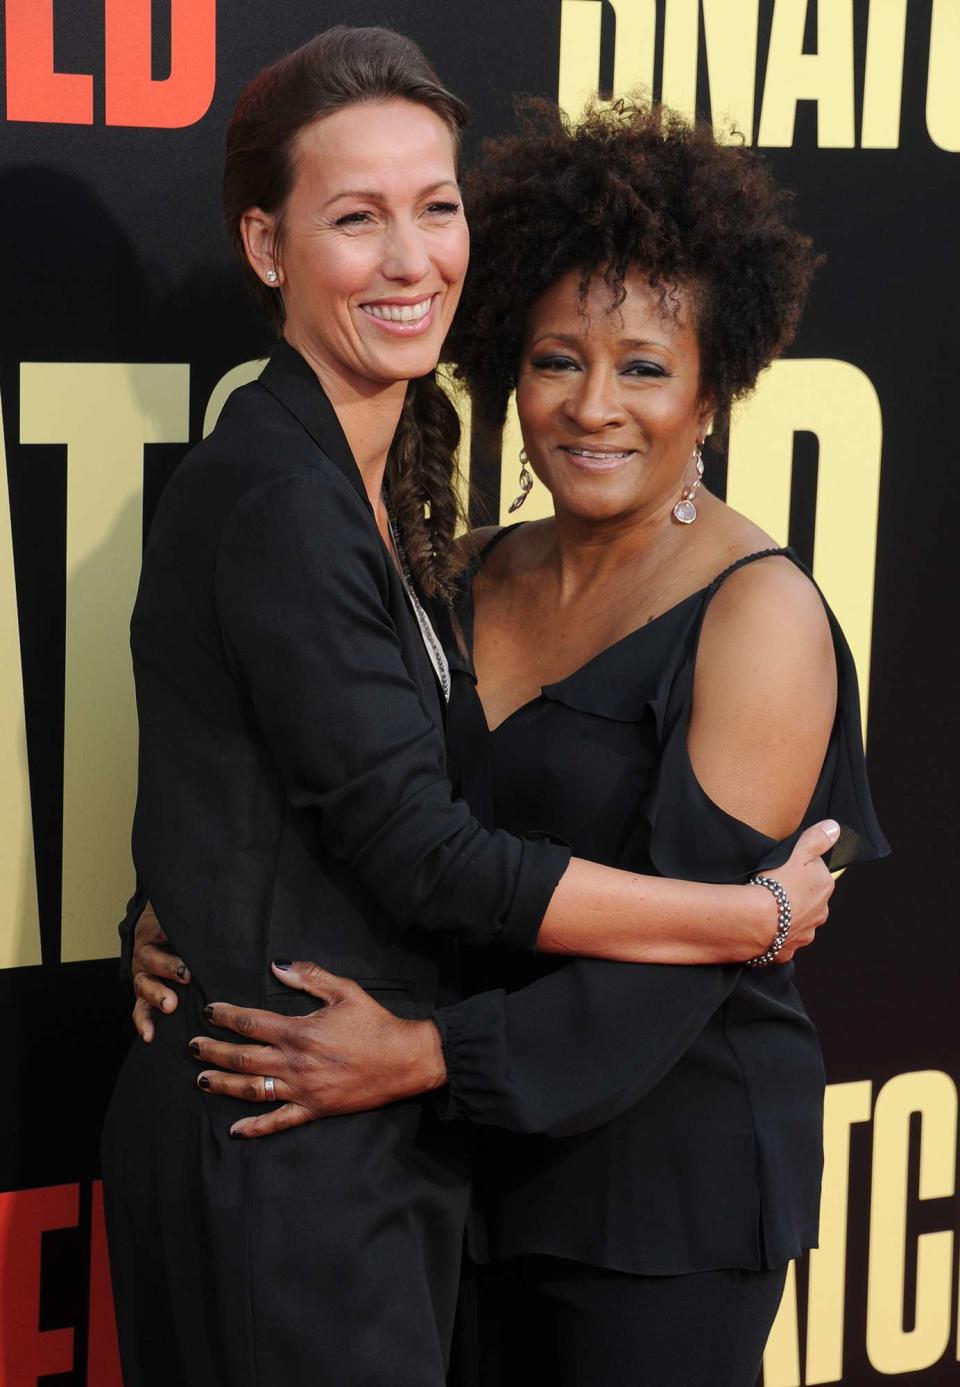 Wanda Sykes and Alex Sykes arrive at the premiere of 20th Century Fox's "Snatched" at Regency Village Theatre on May 10, 2017 in Westwood, California